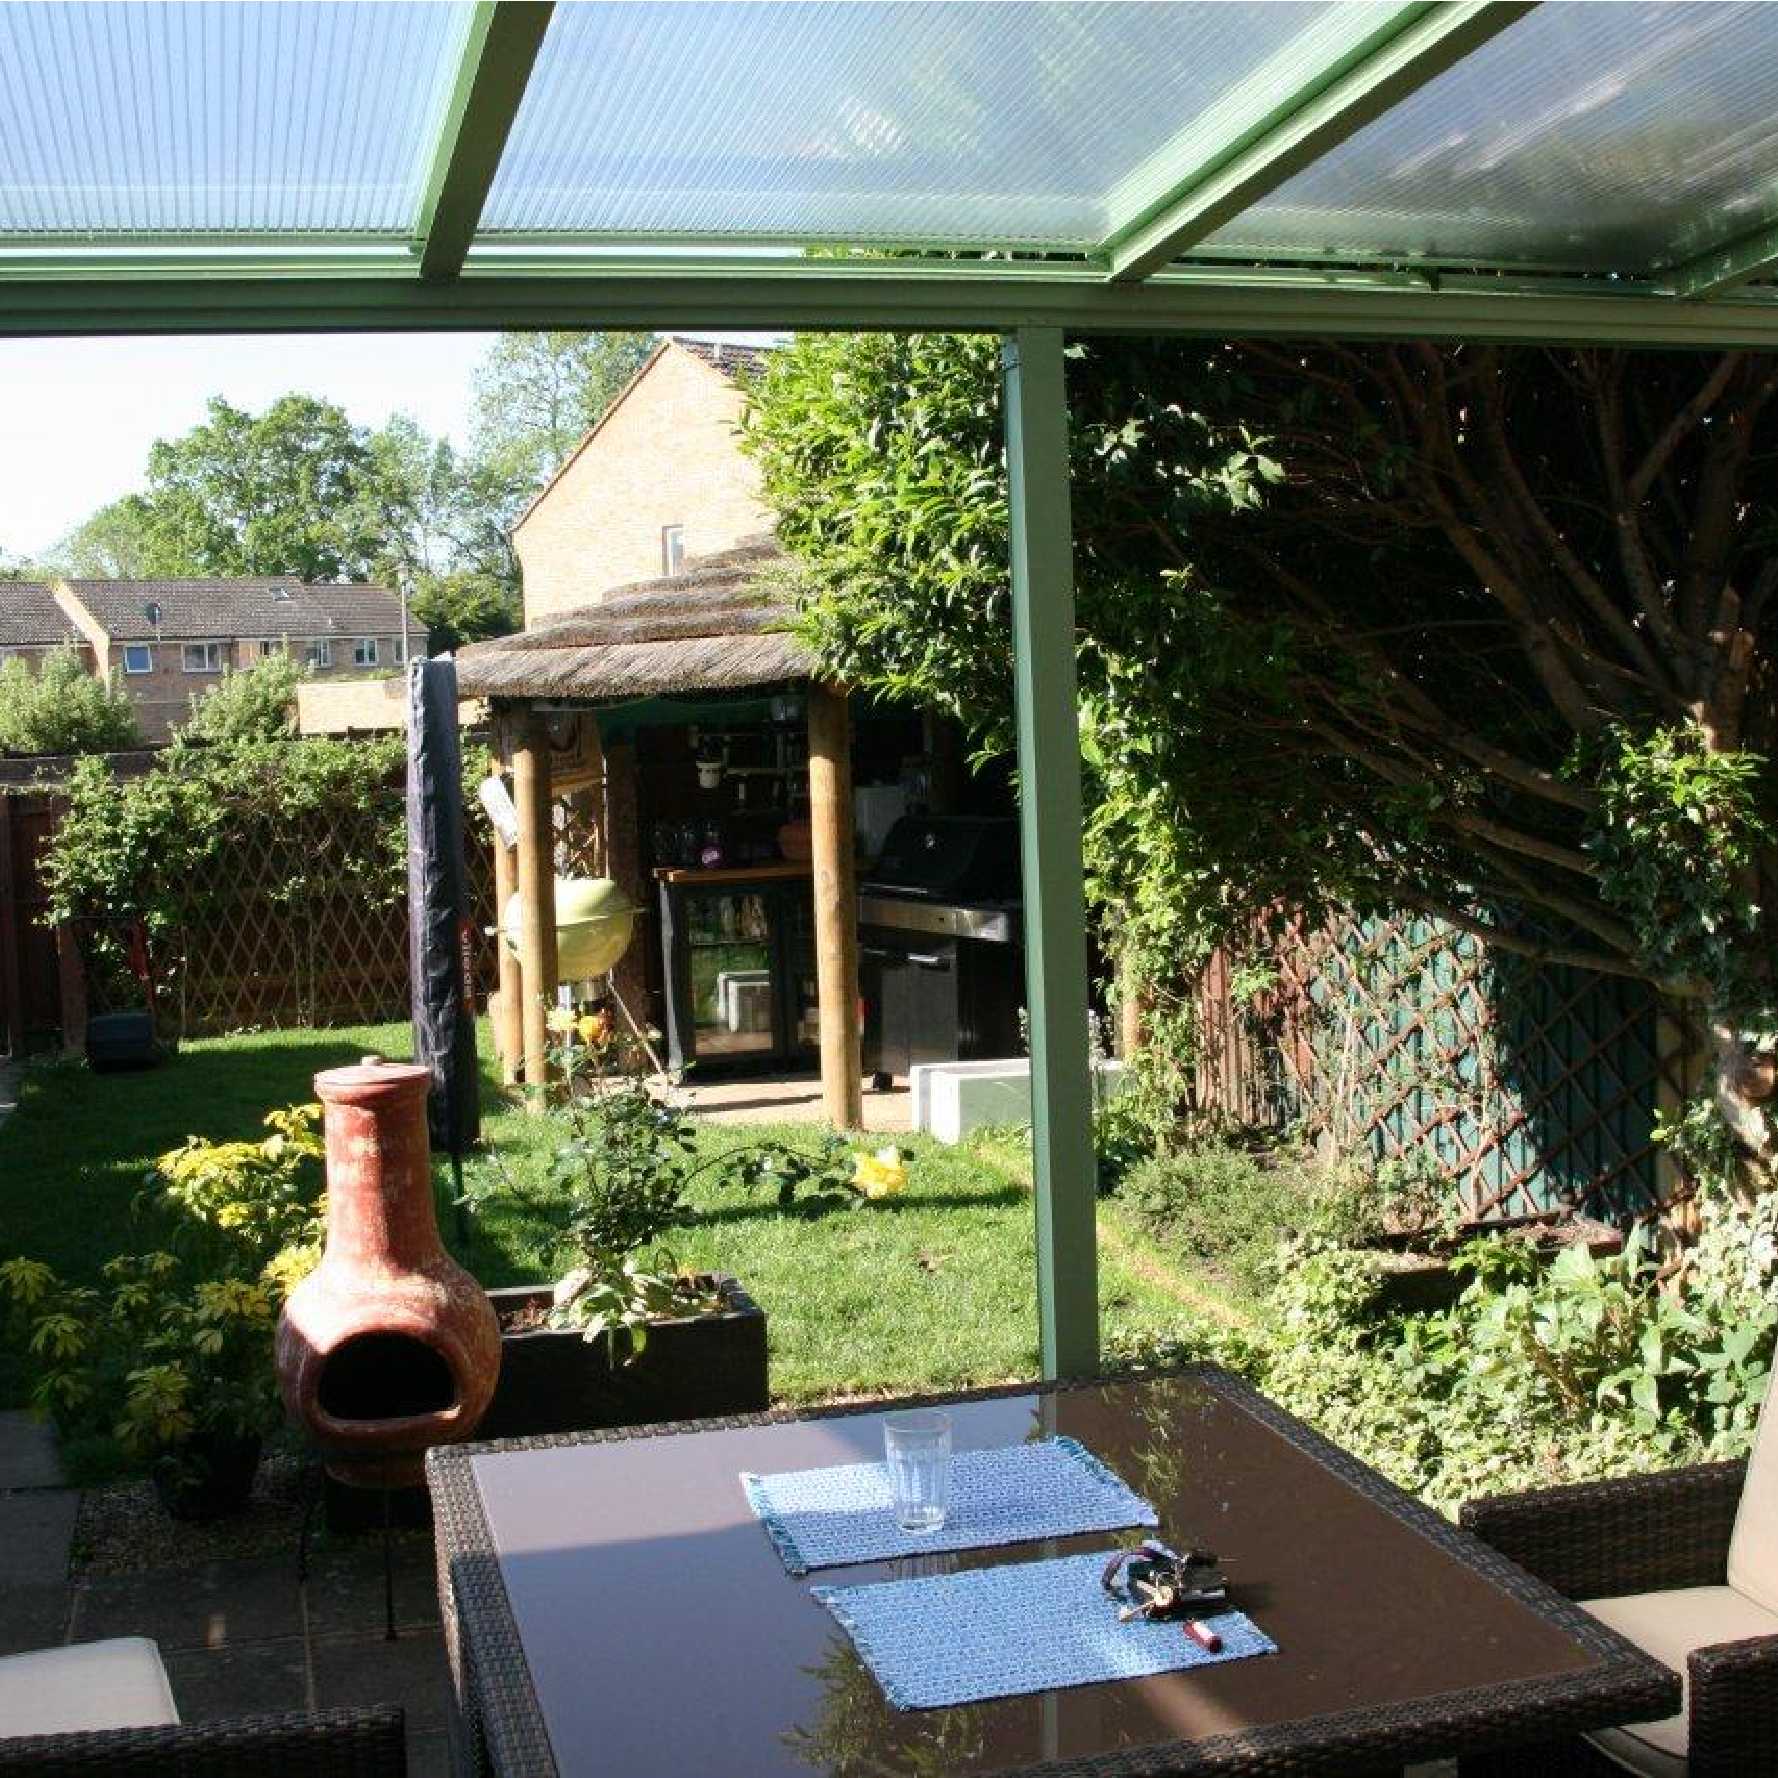 Affordable Omega Smart Lean-To Canopy, White with 16mm Polycarbonate Glazing - 3.1m (W) x 2.5m (P), (2) Supporting Posts